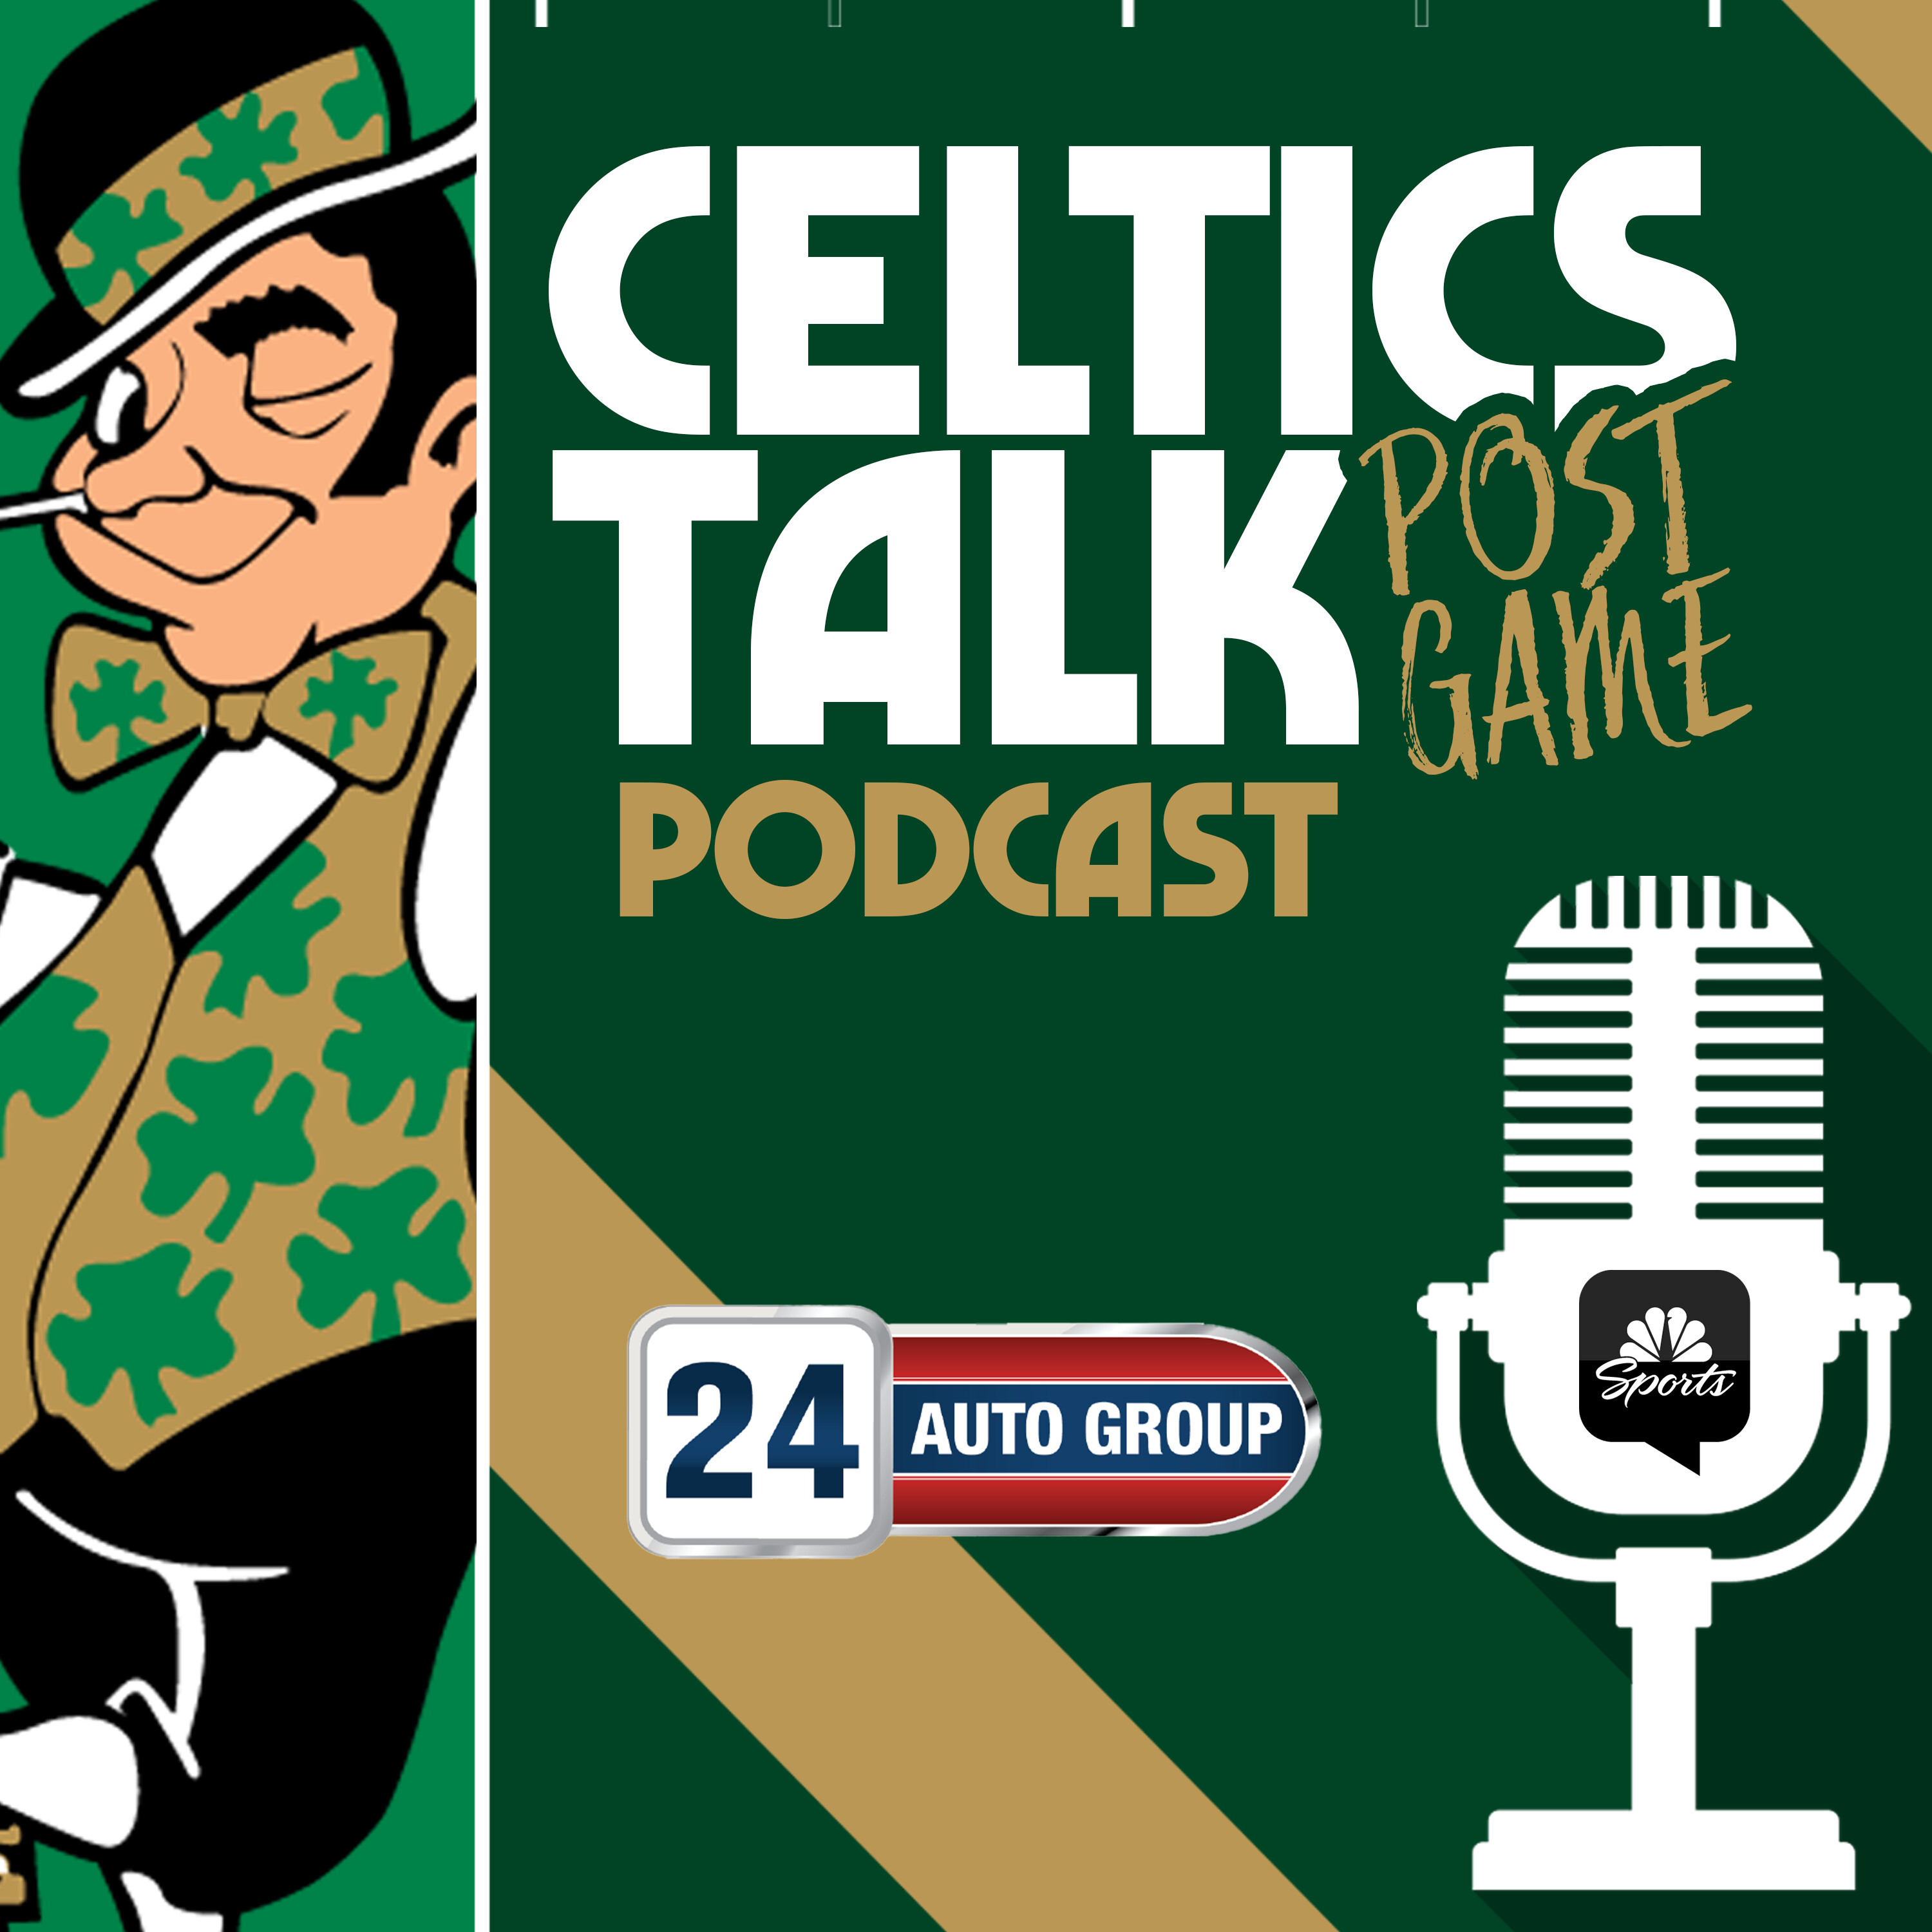 POSTGAME POD: Celtics execute when it matters down the stretch to close out win over Hawks